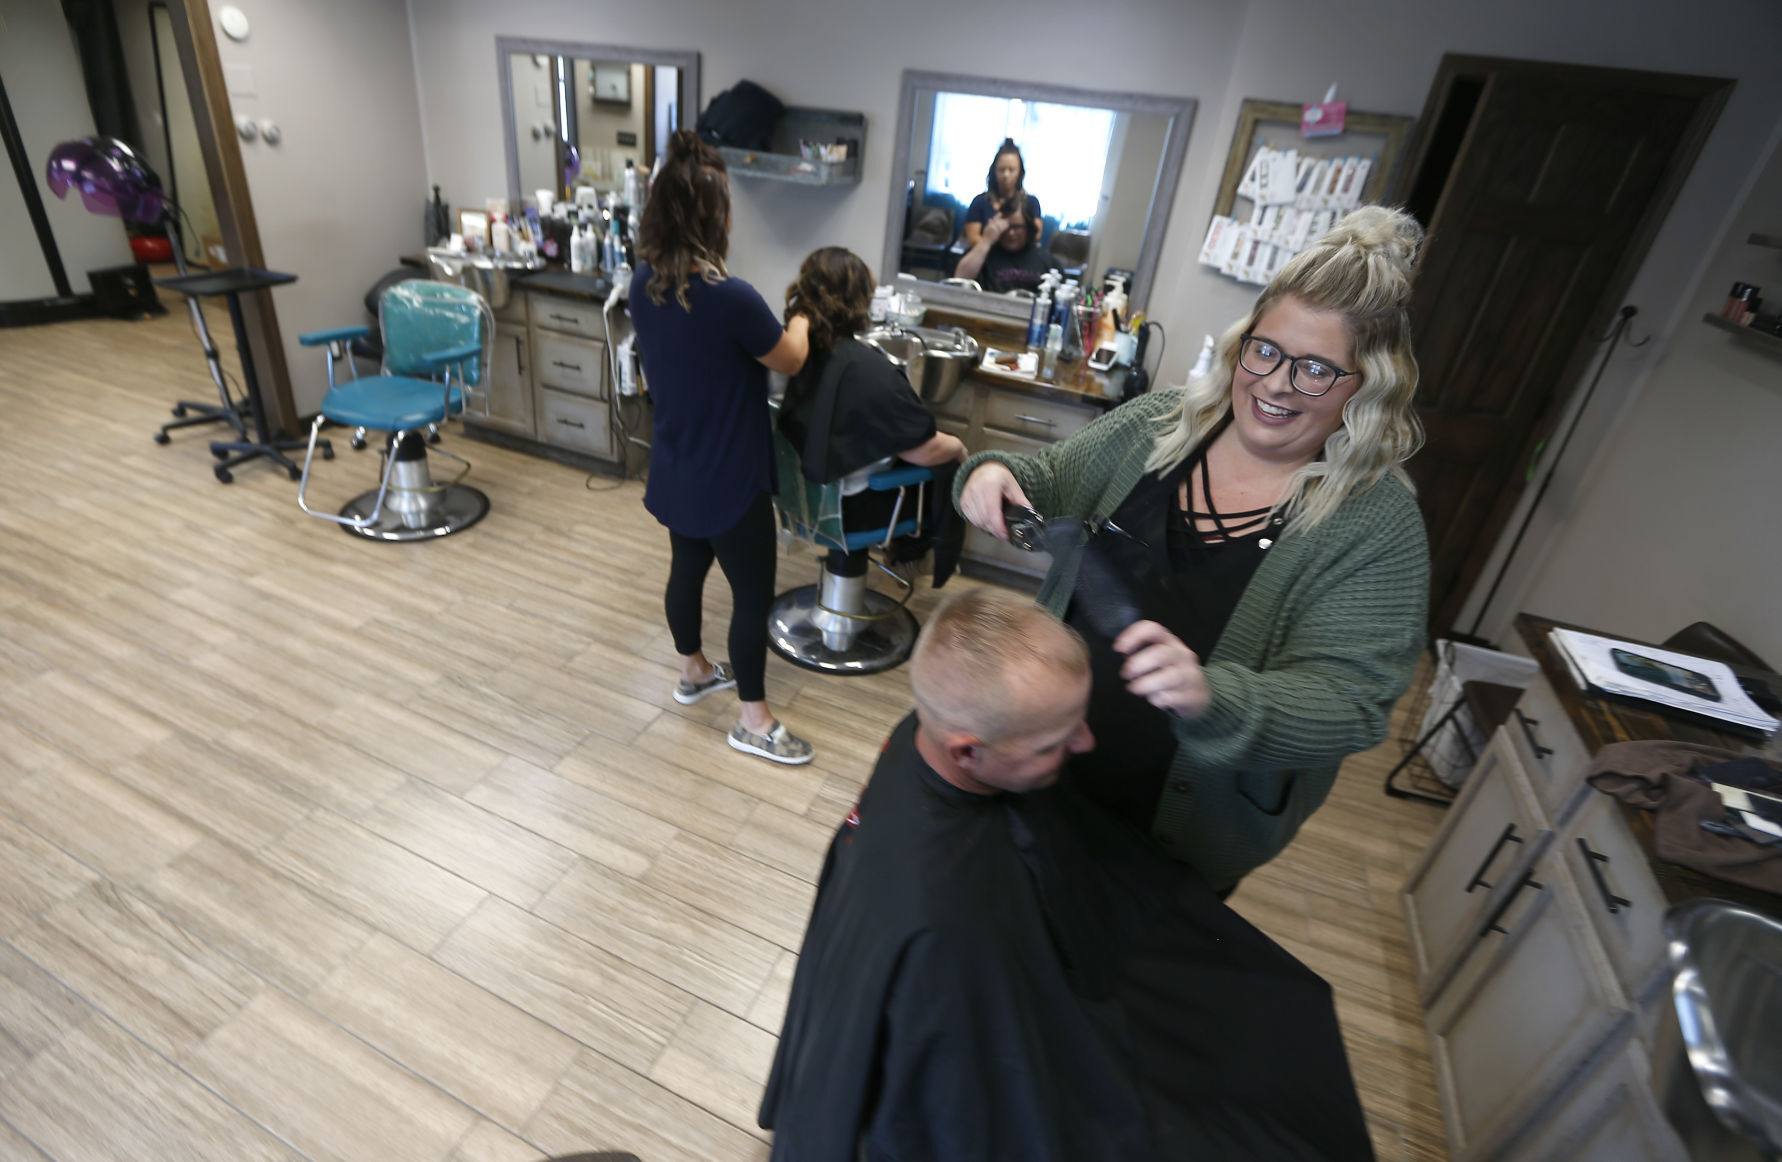 Amanda Whitt, is the owner of Midwest Roots Salon in East Dubuque, Ill., which also expanded. PHOTO CREDIT: Dave Kettering